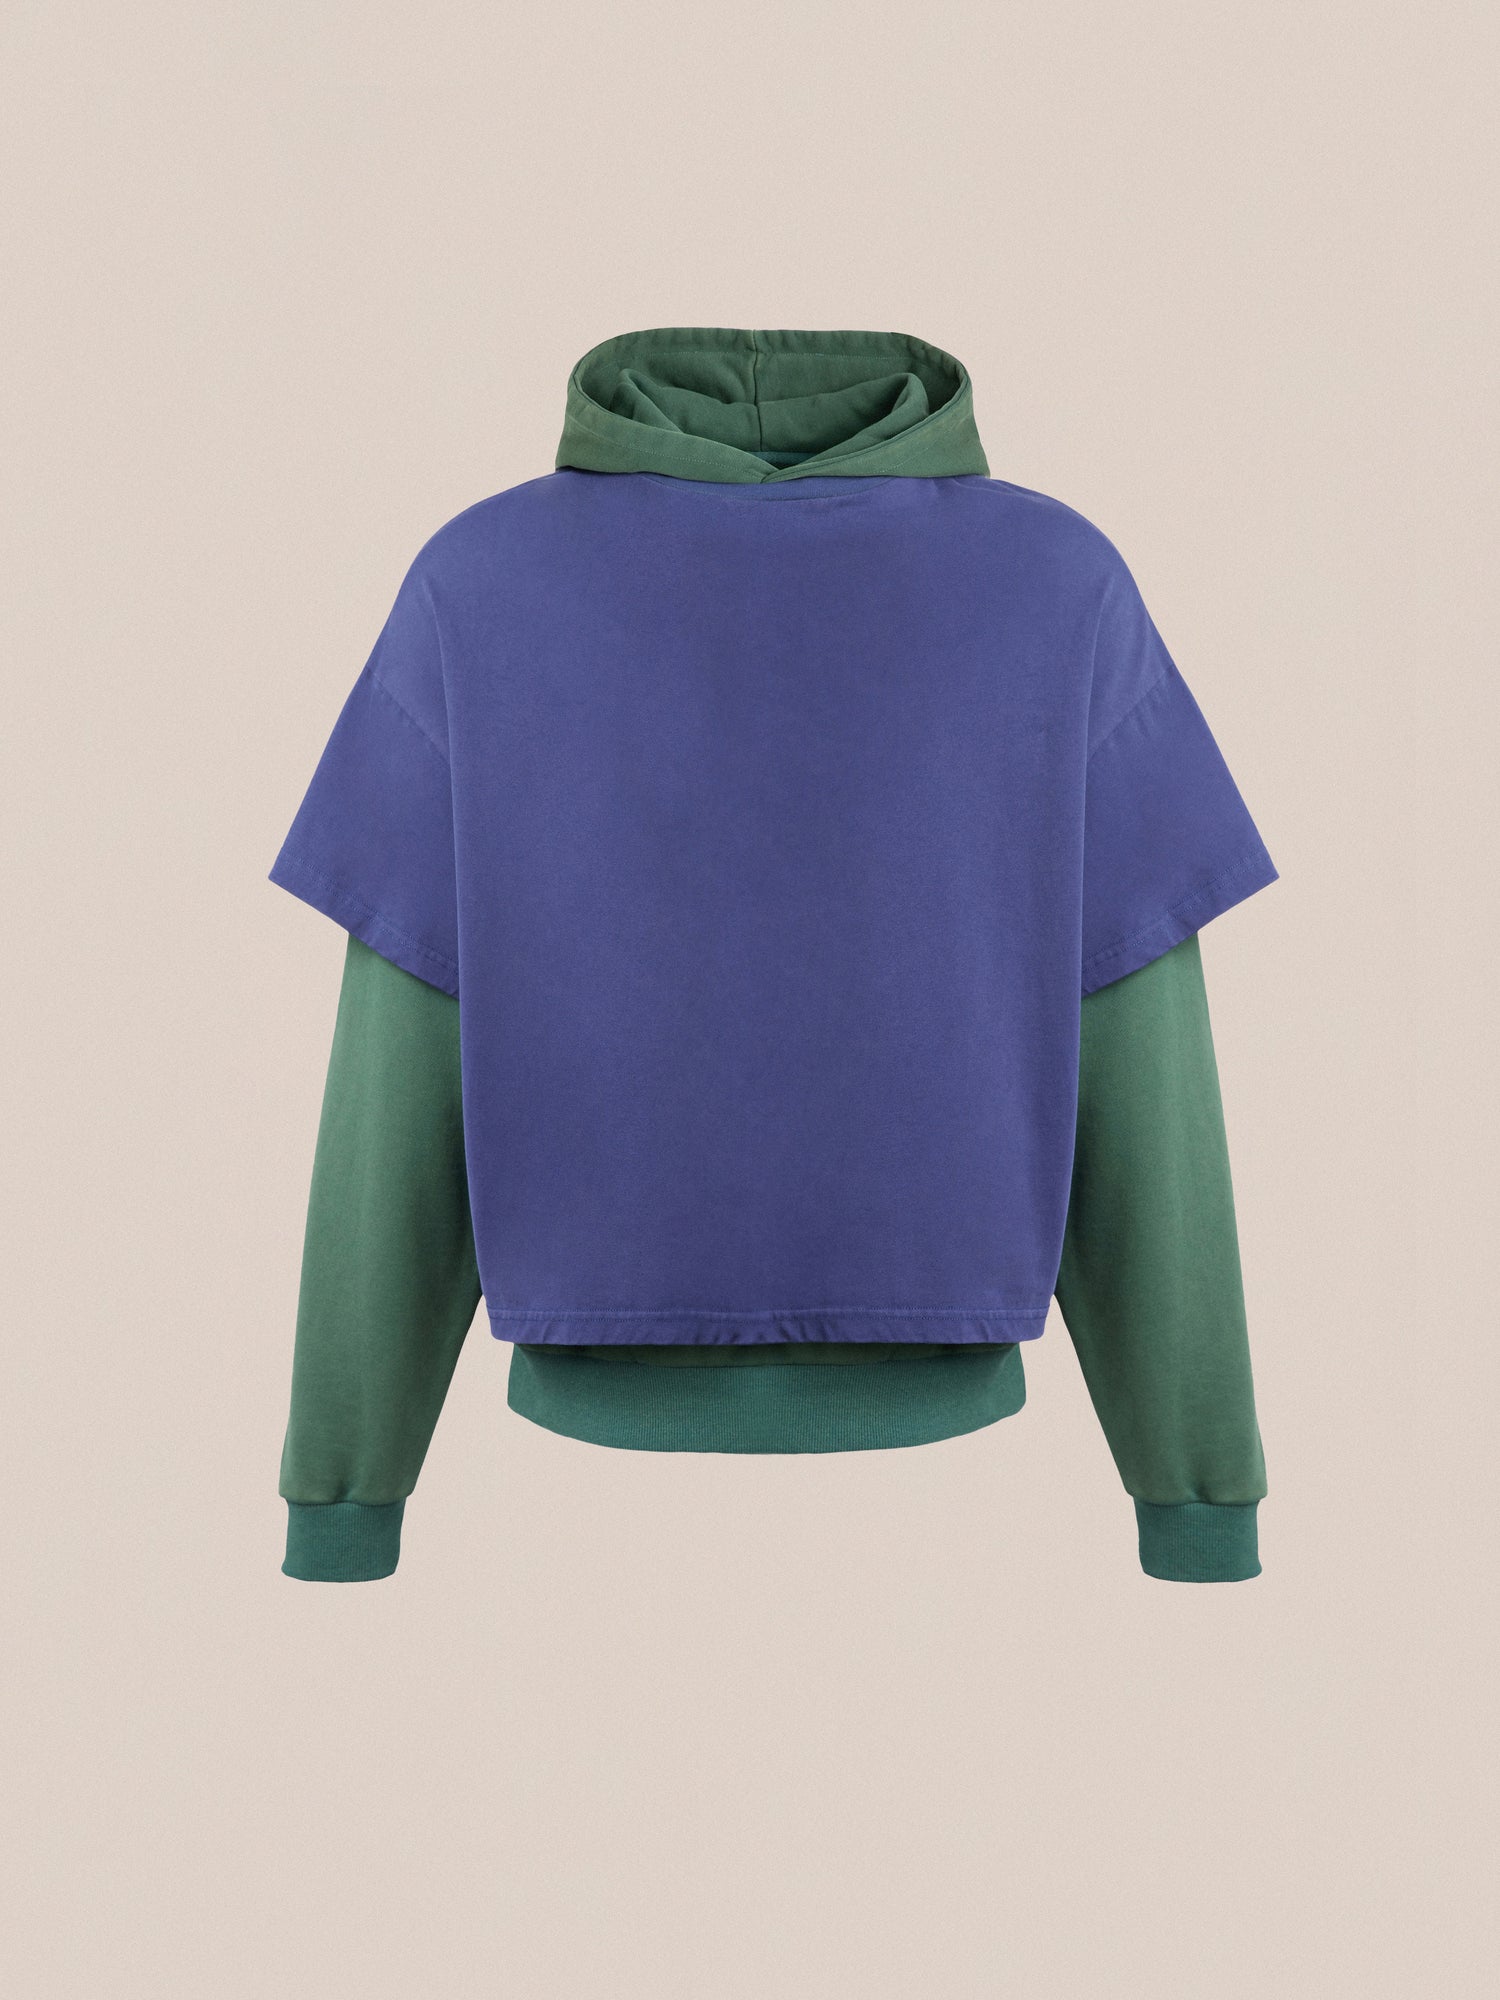 A blue and green Found double-layer hooded sweatshirt.